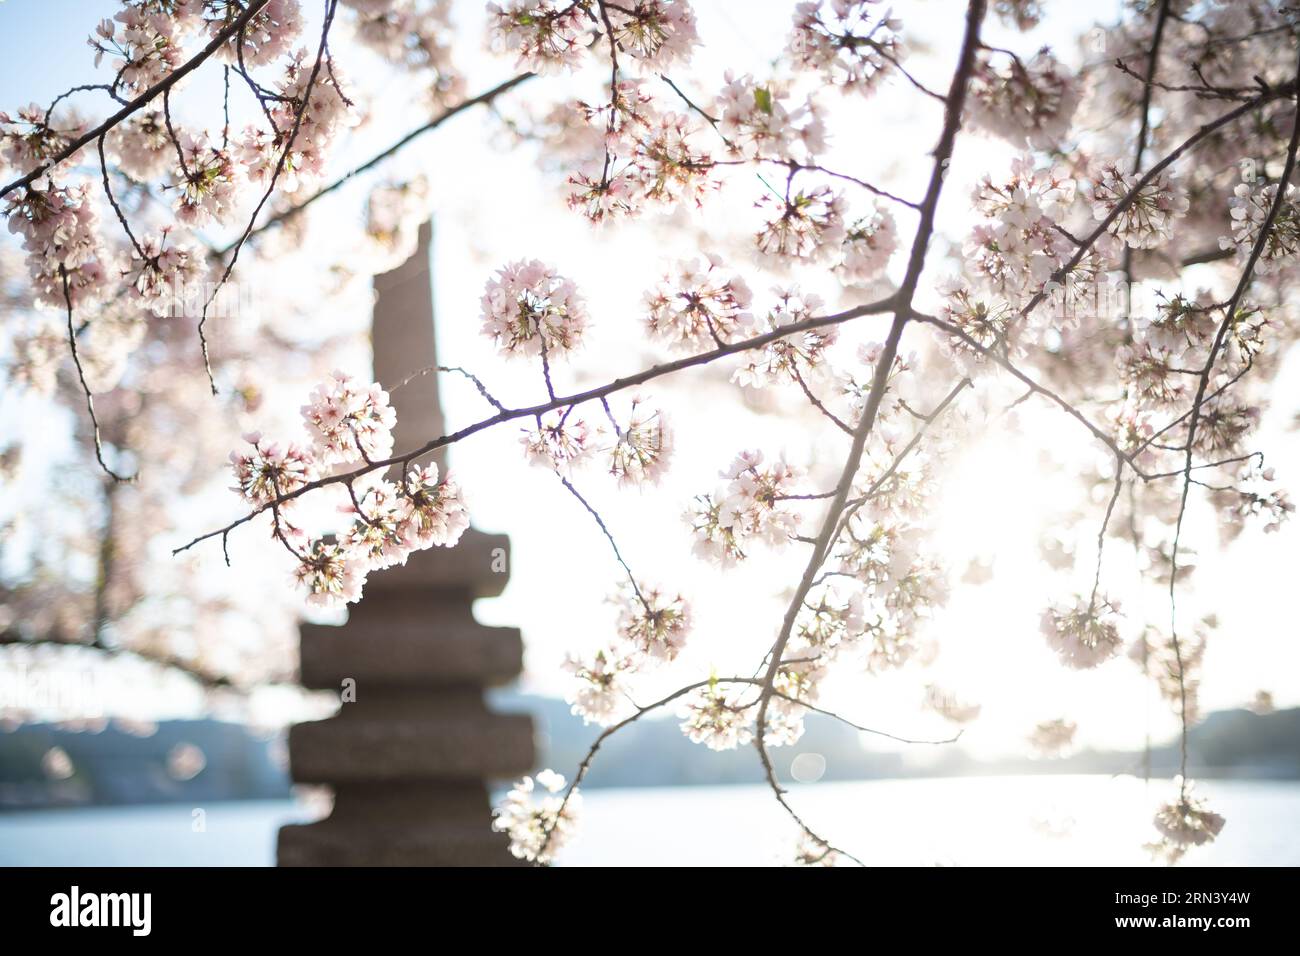 WASHINGTON DC, United States — The Japanese Pagoda stands surrounded by a flourish of cherry blossoms, a testament to the cultural ties between the U.S. and Japan. Located near the Tidal Basin, the stone monument adds a touch of traditional Japanese architecture amidst the sea of pink and white blossoms, echoing the historical connection between the two nations. Stock Photo